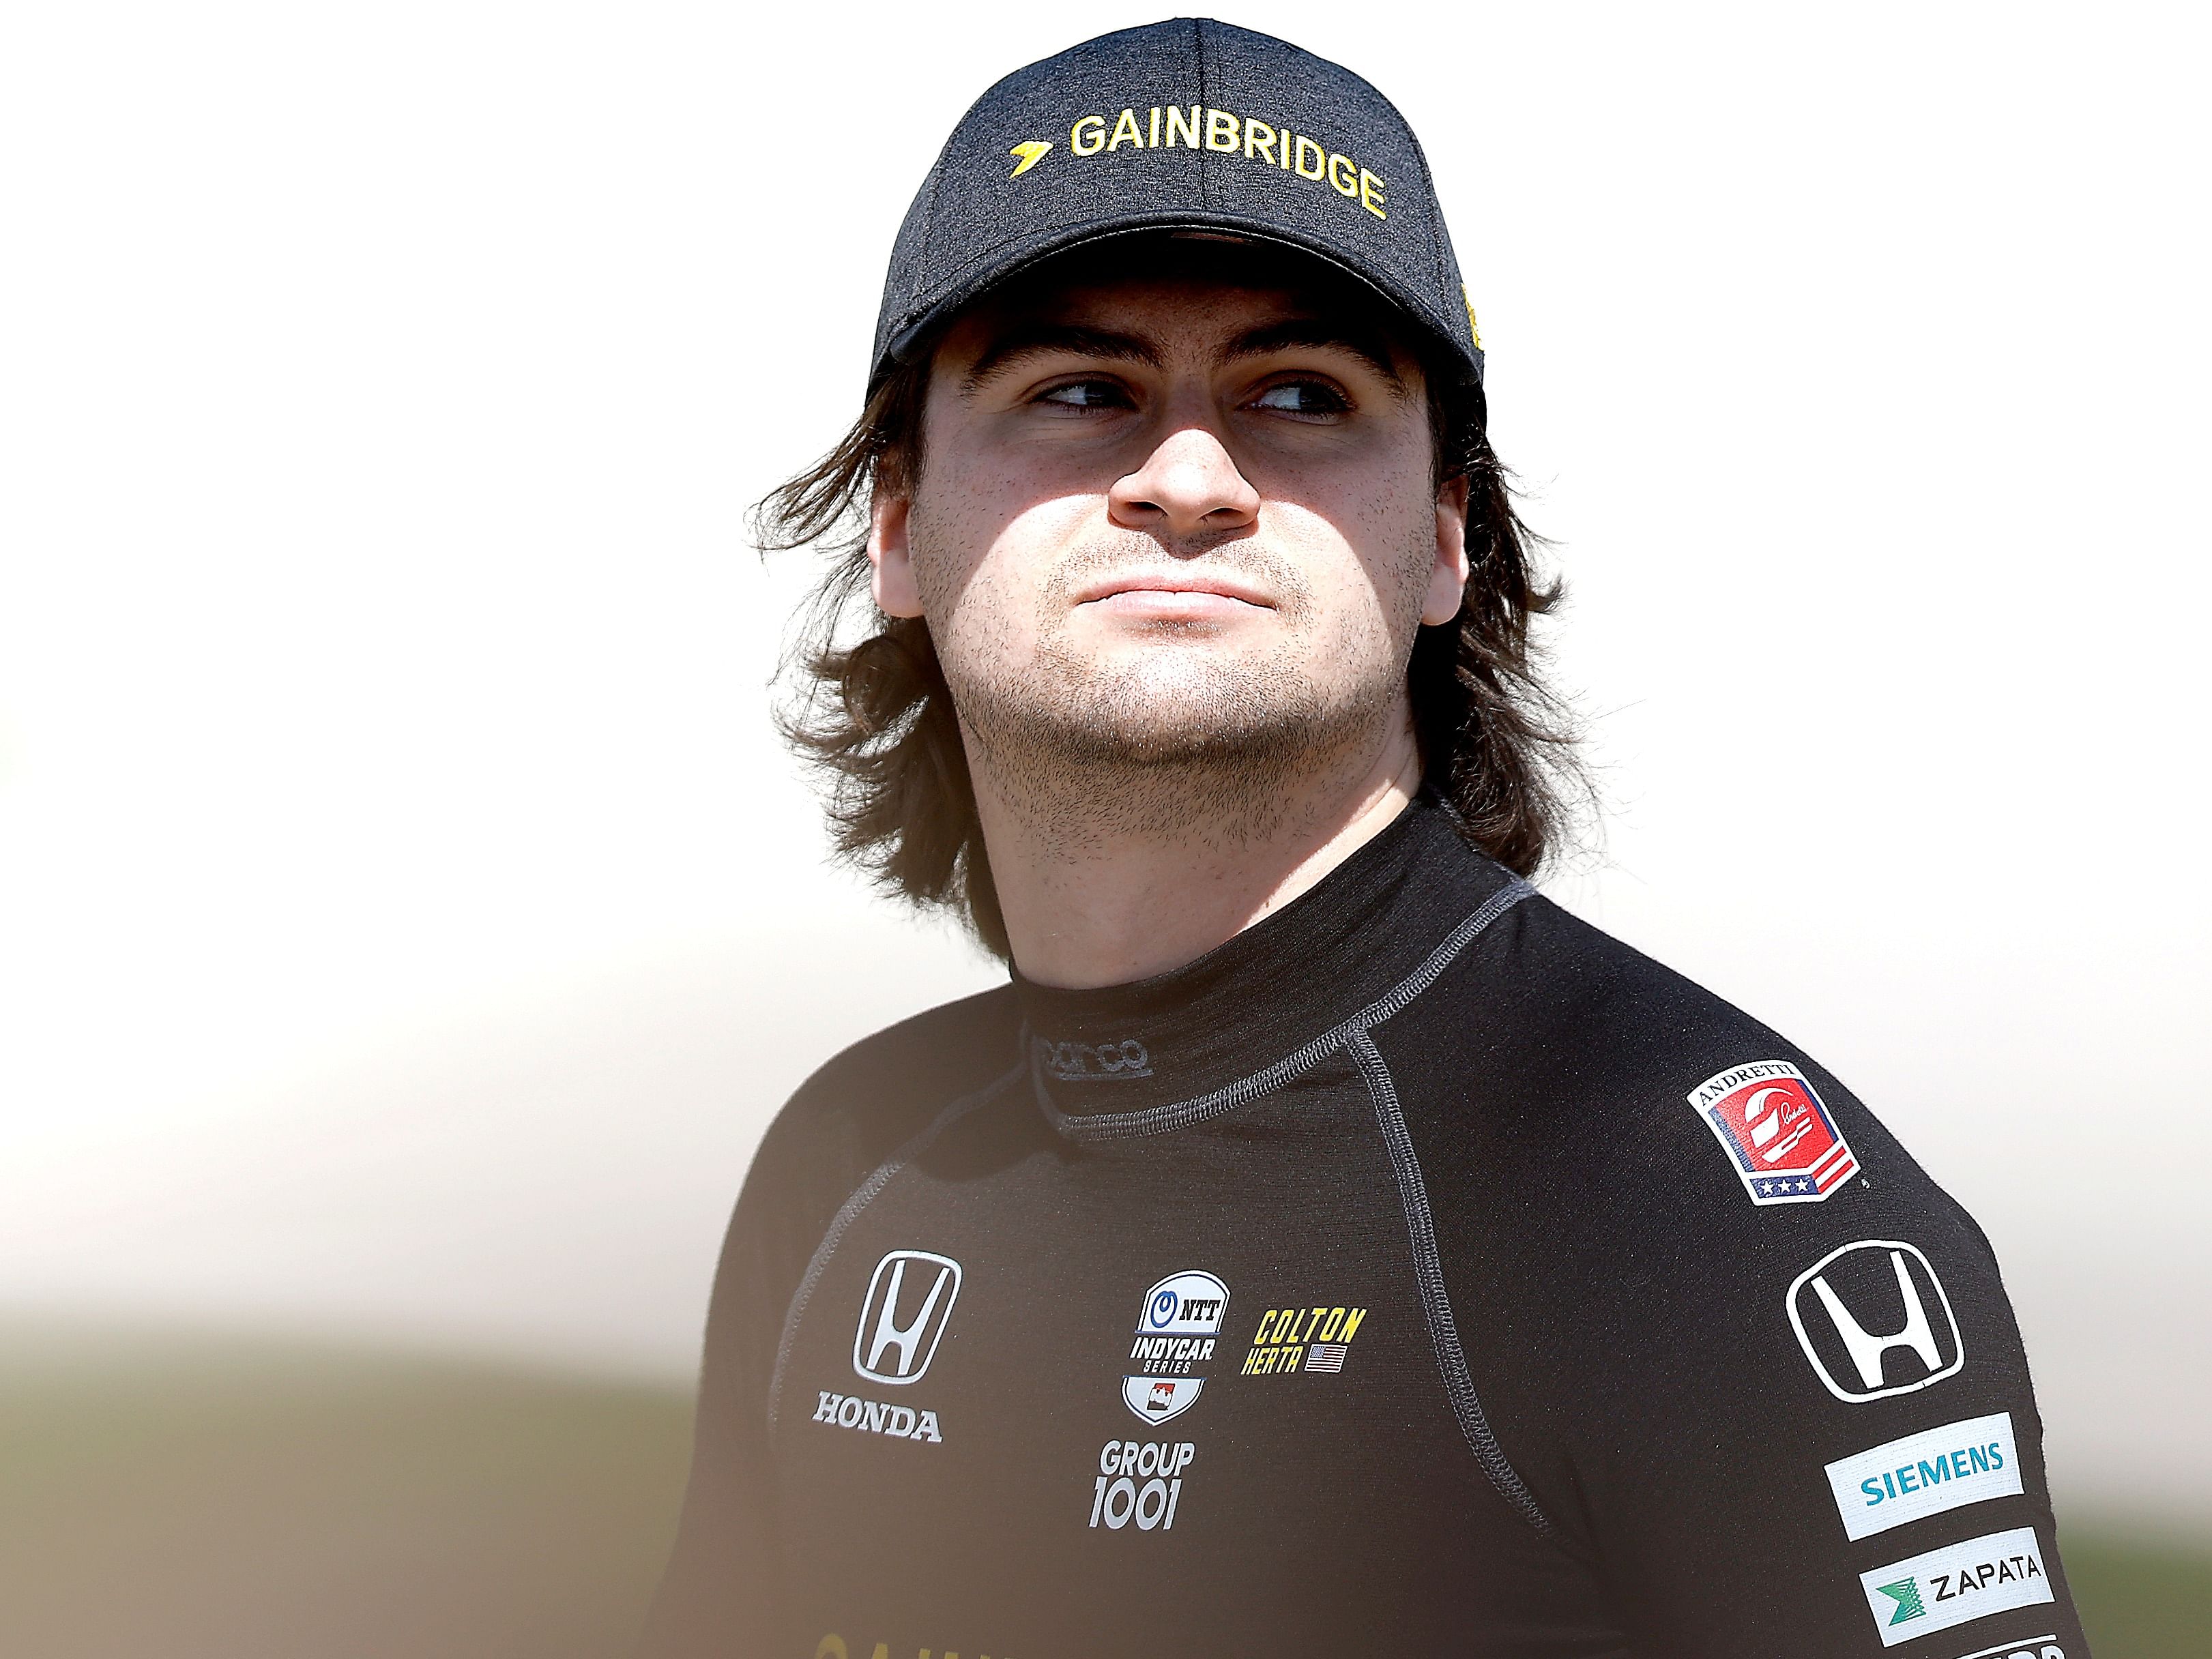 Colton Herta, driver of the #26 Gainbridge Honda, looks on during qualifying for the NTT IndyCar Series PPG 375 - Practice at Texas Motor Speedway on April 01, 2023 in Fort Worth, Texas. (Photo by Sean Gardner/Getty Images)